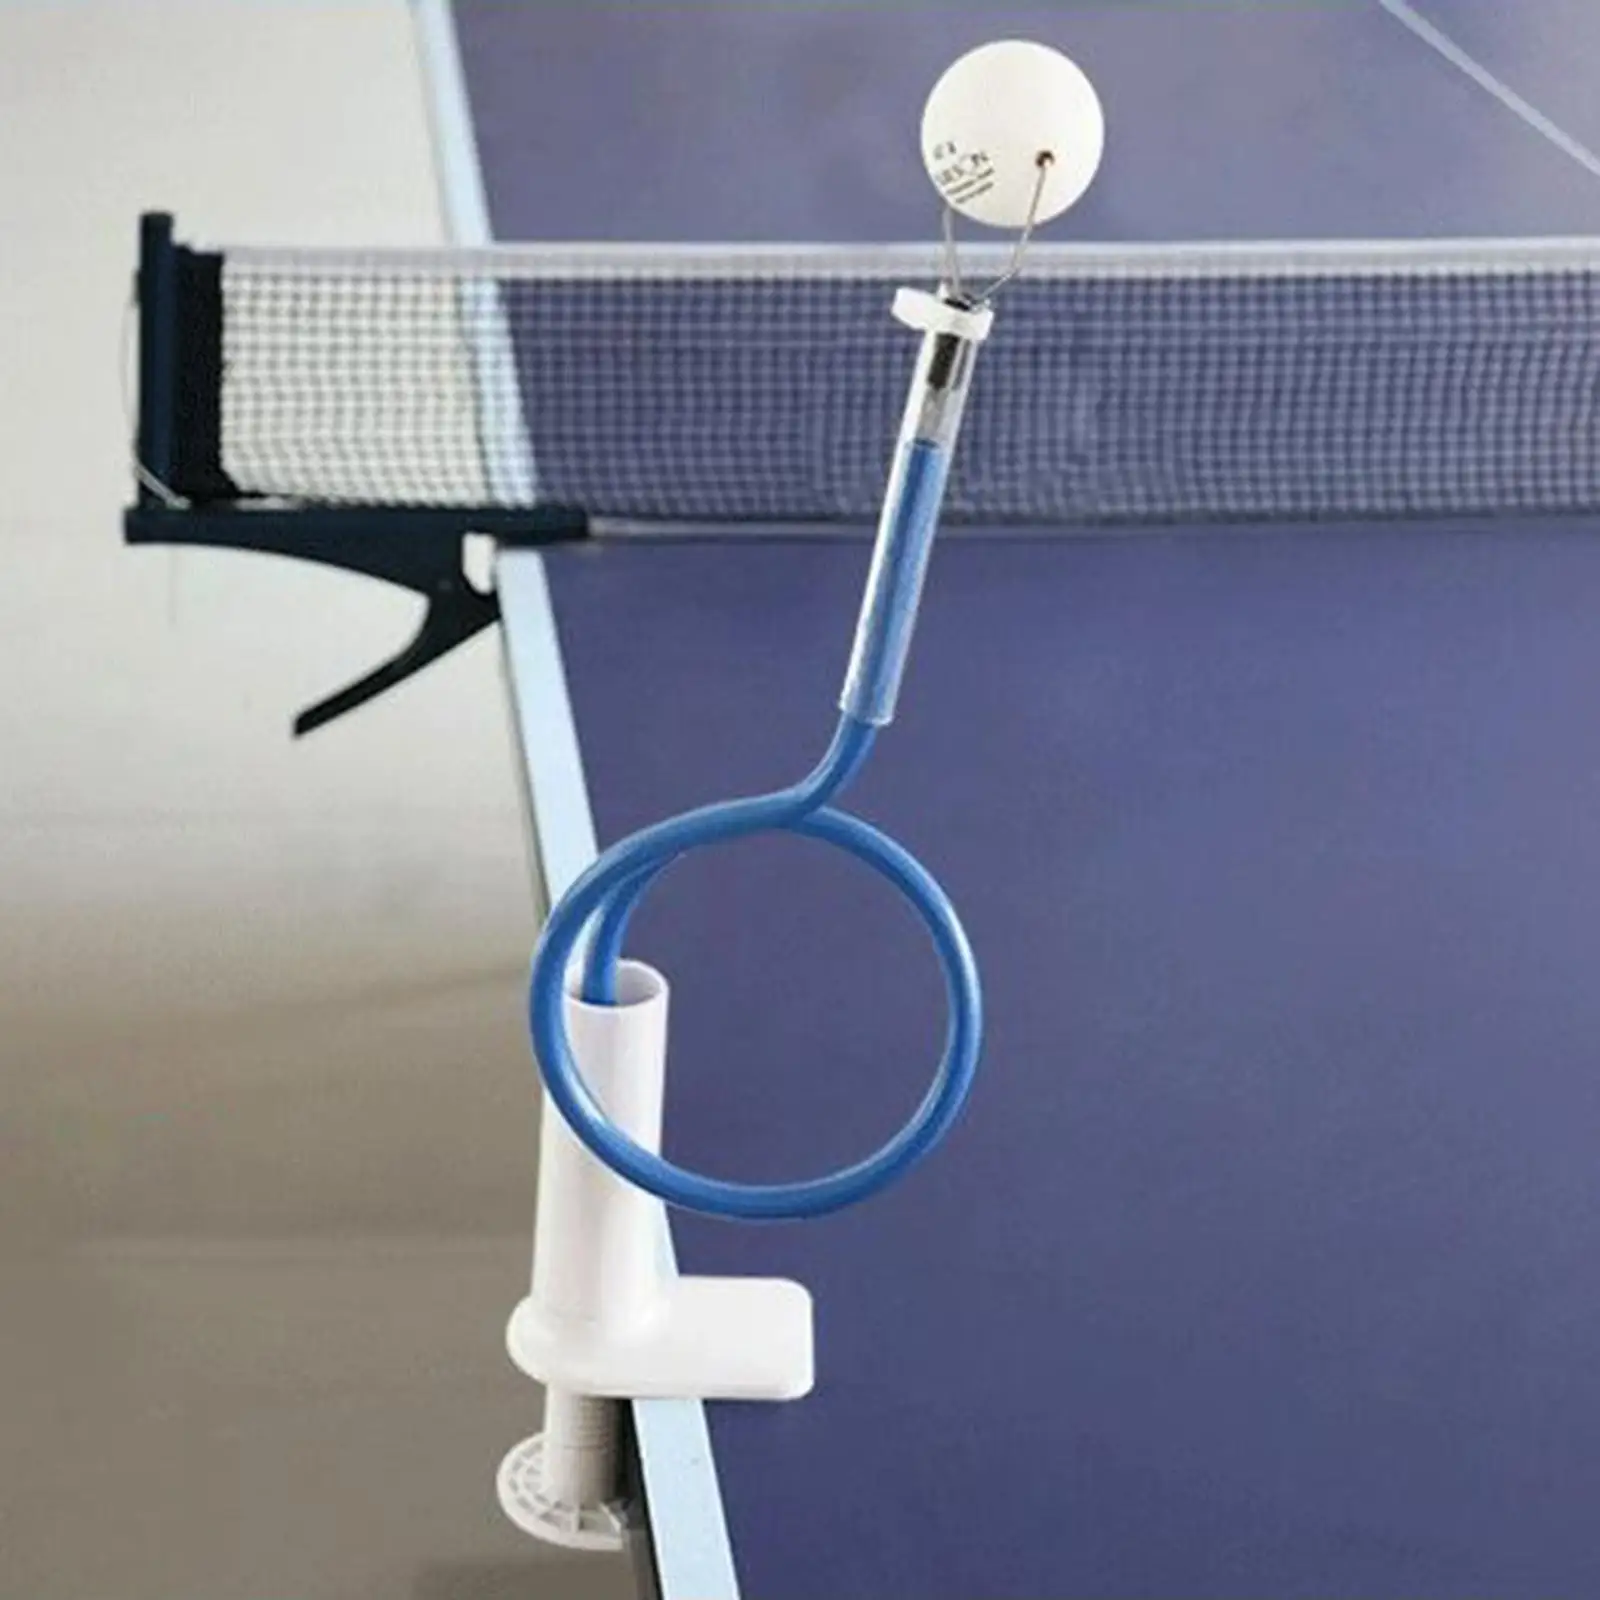 Clamp Fixed Machine Professional Table Tennis Training for Stroking Practice